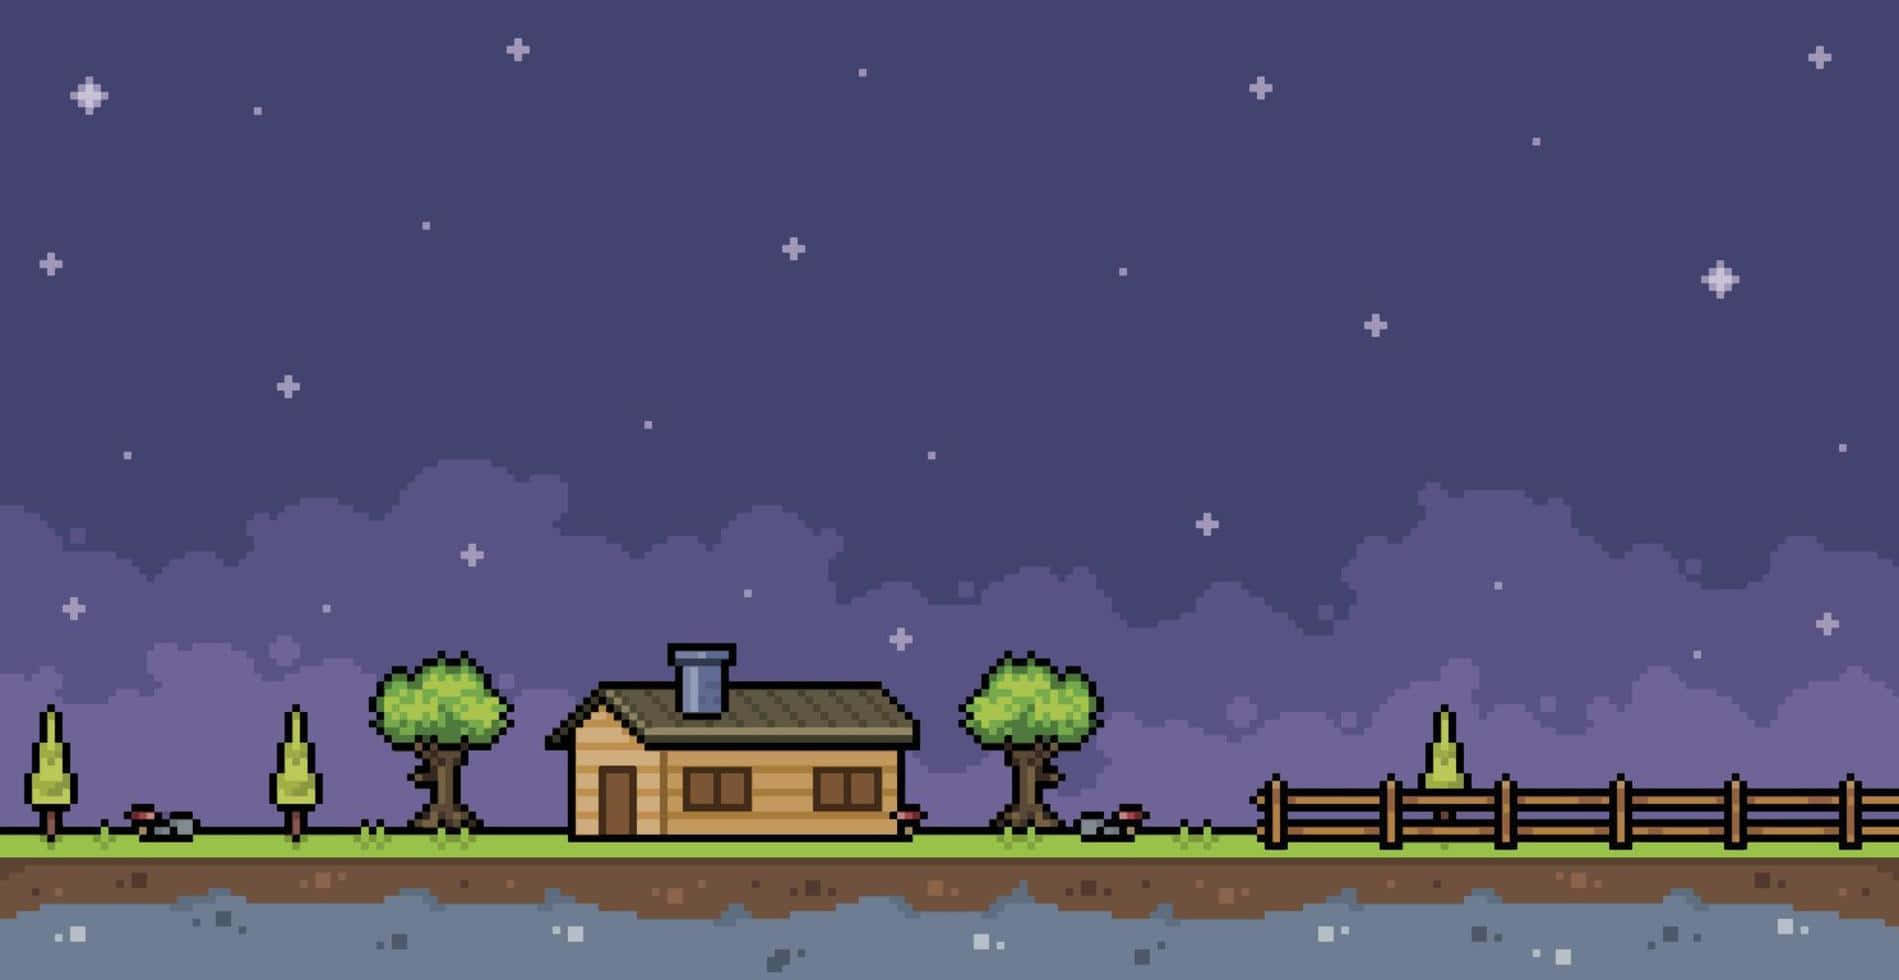 Looking for a fresh new look for your home screen? We've got you covered with our amazing pixel art background!